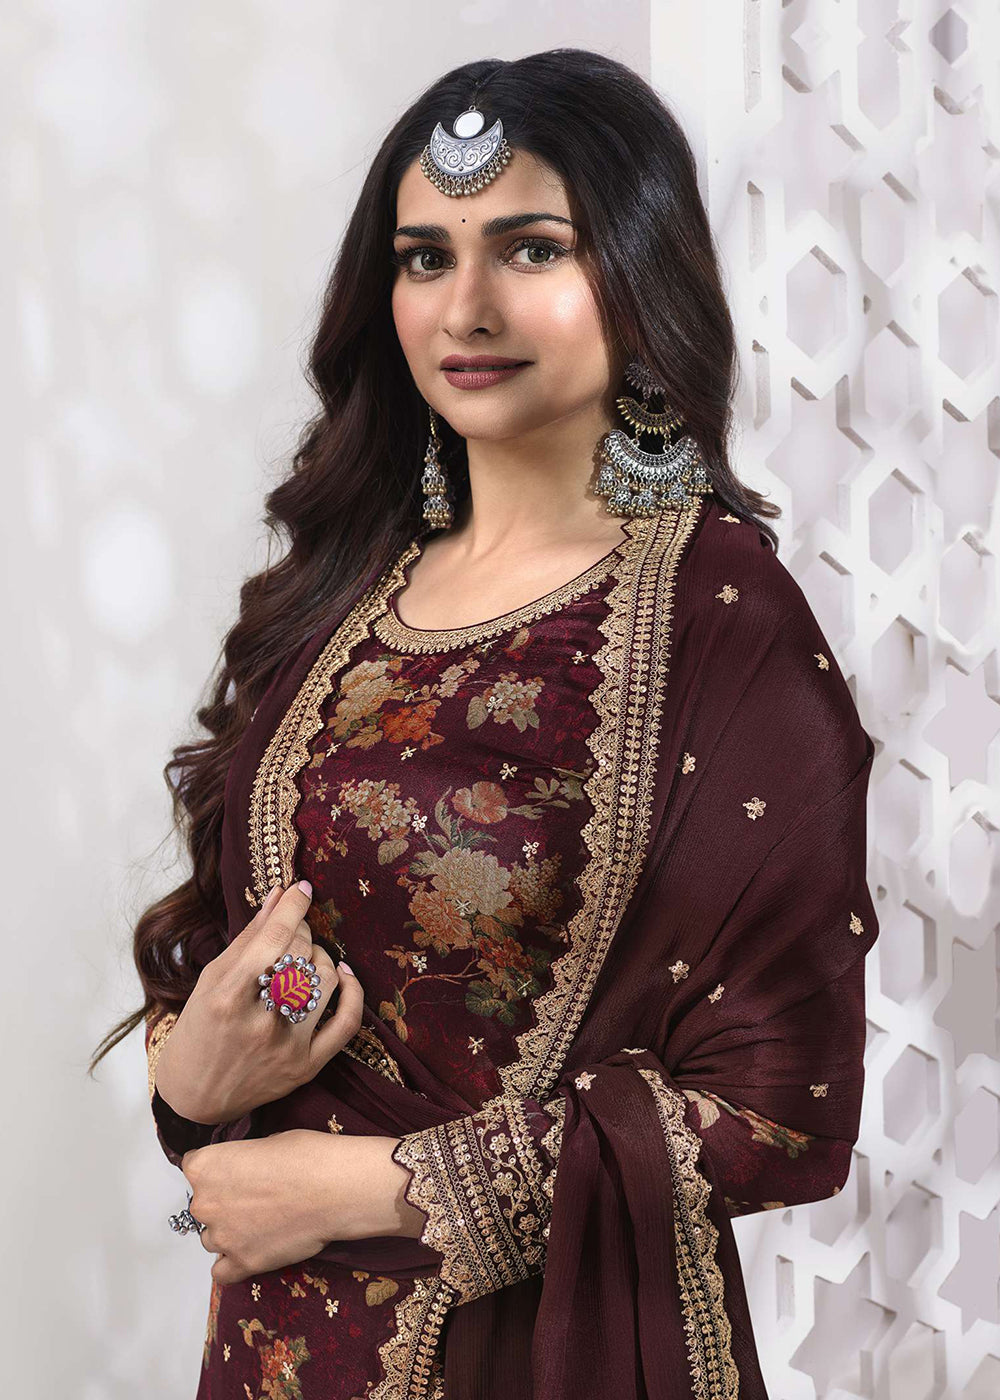 Shop Now Prachi Desai Maroon Silk Georgette Embroidered Sharara Suit Online at Empress Clothing in USA, UK, Canada, Italy & Worldwide.